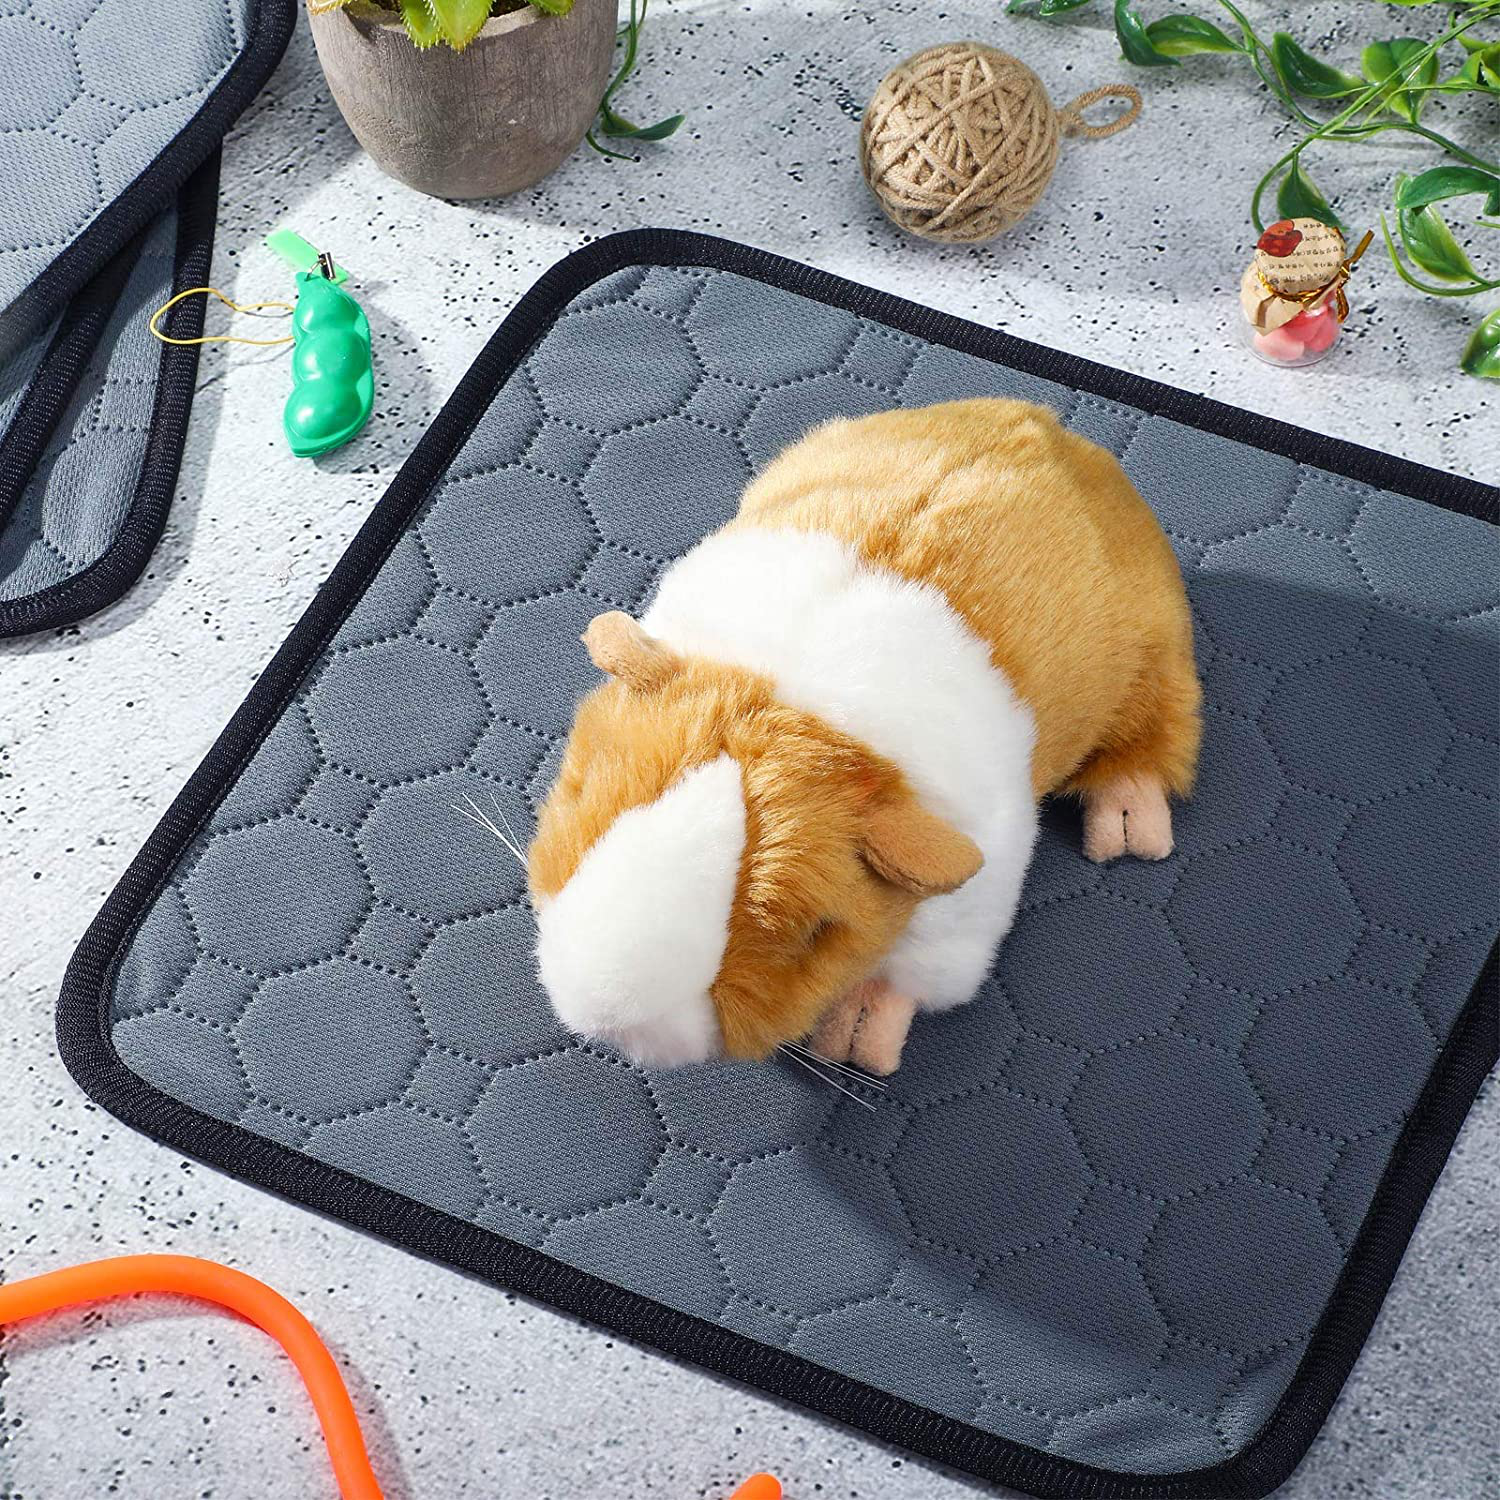 Jetec 5 Pieces Guinea Pig Cage Liners Washable and Reusable Guinea Pig Pee Pads Anti-Slip and Highly Absorbent Guinea Pig Bedding Waterproof Pet Training Pads for Small Rabbit Hamster Rat